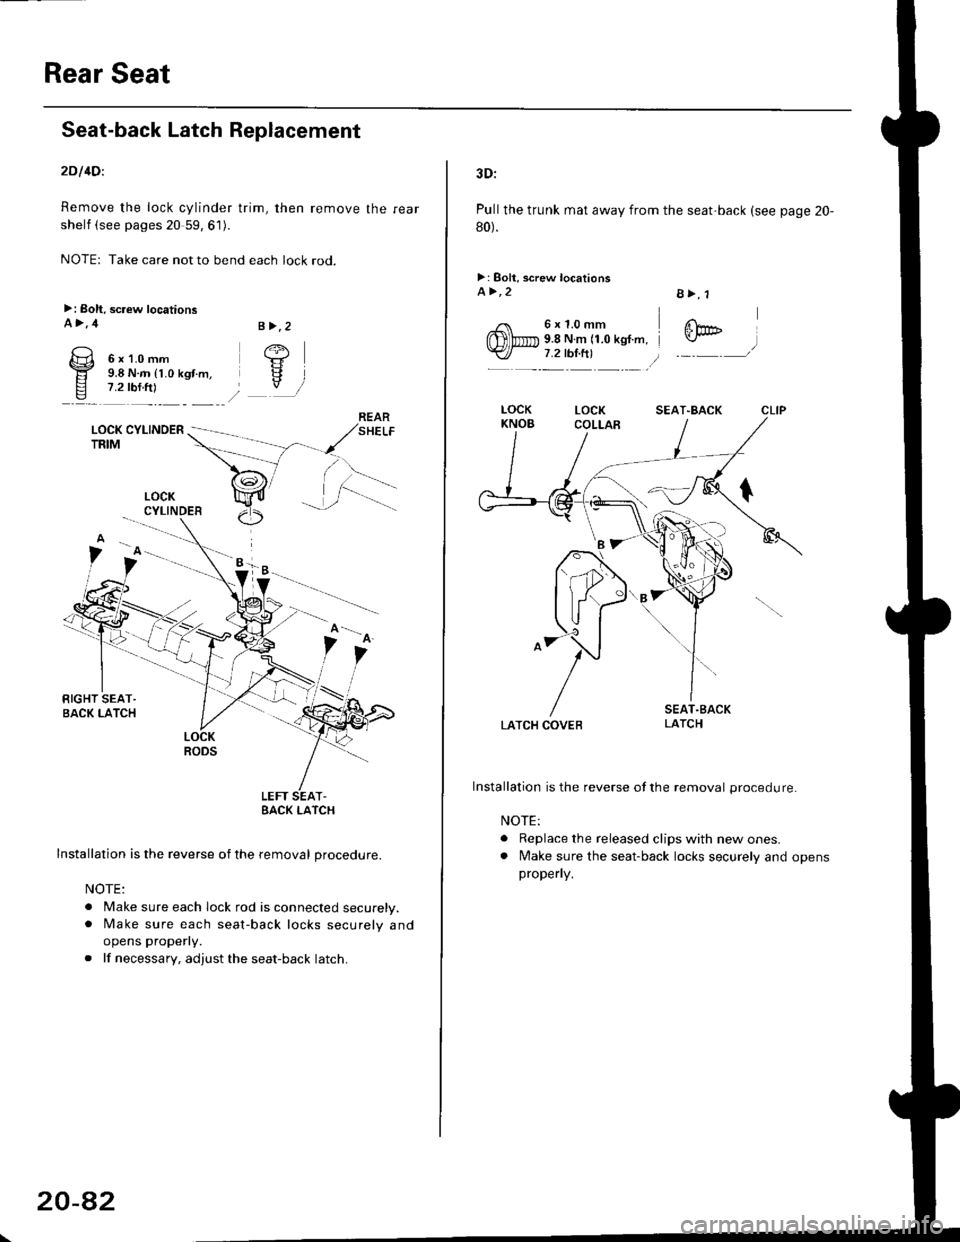 HONDA CIVIC 1997 6.G Workshop Manual Rear Seat
Seat-back Latch Replacement
2Dl4Dl
Remove the lock cylinder trim, then remove the rear
shelf (see pages 20 59, 61).
NOTE: Take care not to bend each lock rod.
>: Boh, screw locationsA>,4
6x1